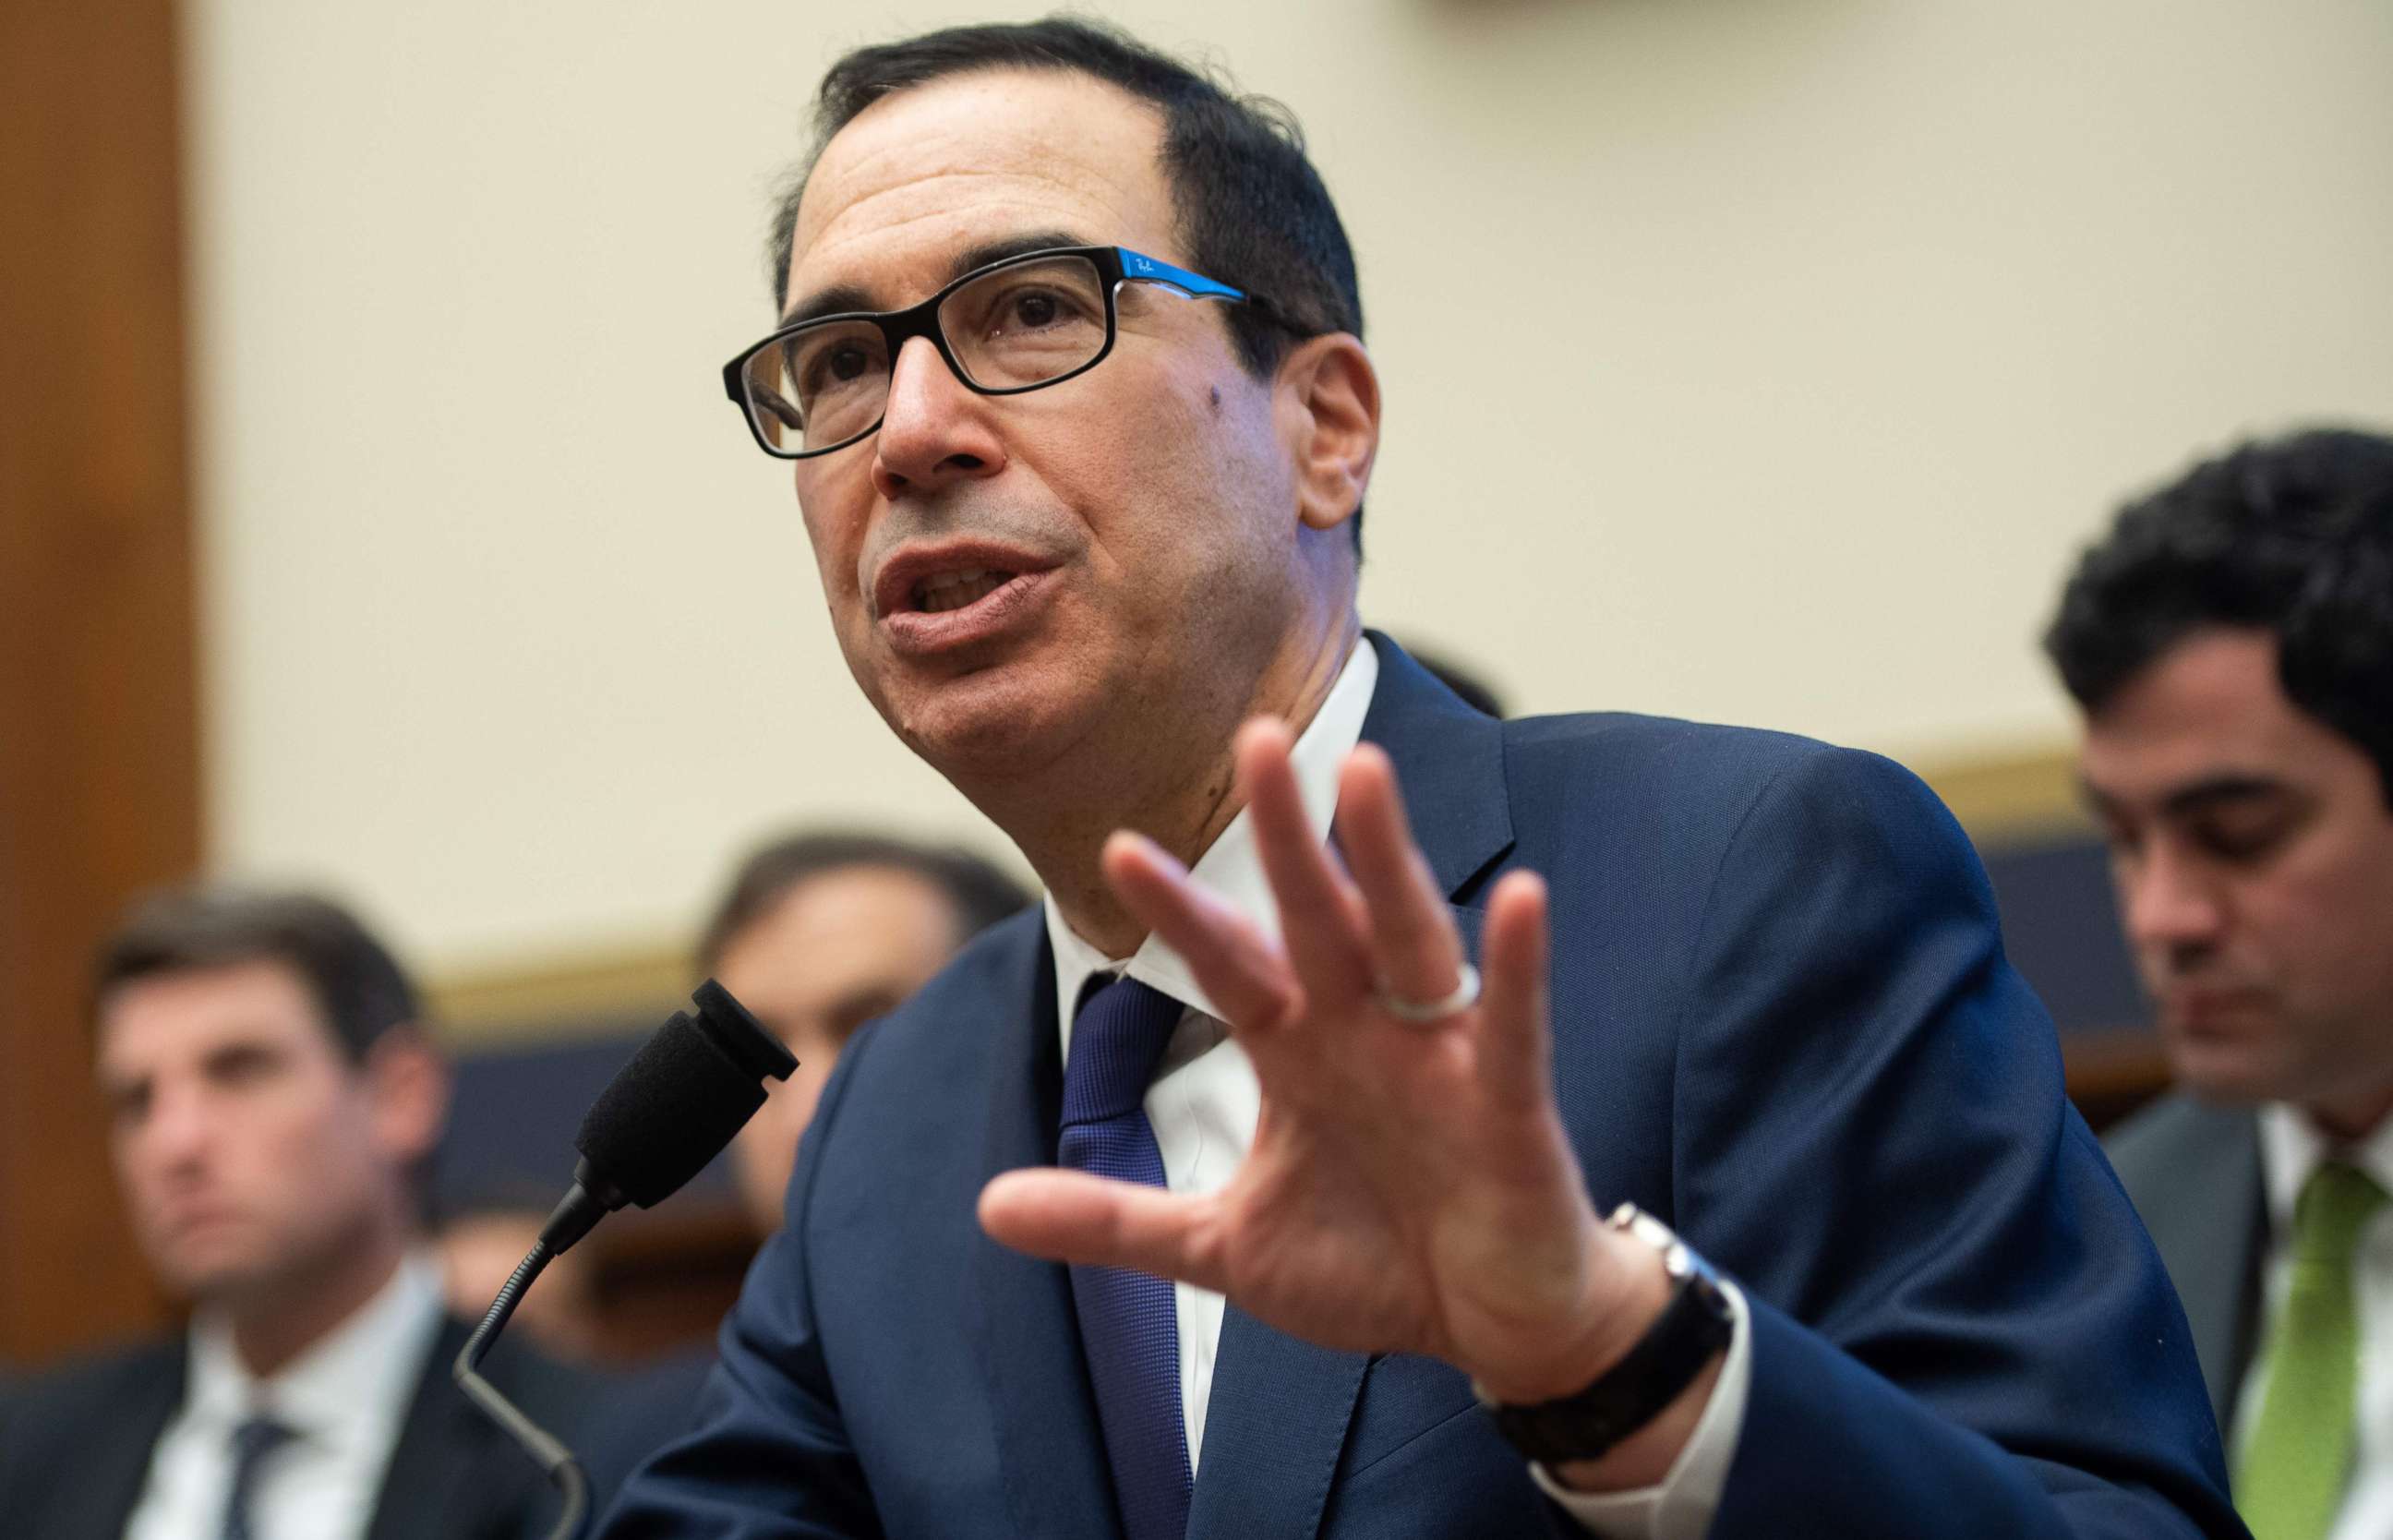 PHOTO: In this file photo taken on May 22, 2019, U.S. Secretary of the Treasury Steven Mnuchin testifies during a House Committee on Financial Services hearing on Capitol Hill in Washington, D.C.